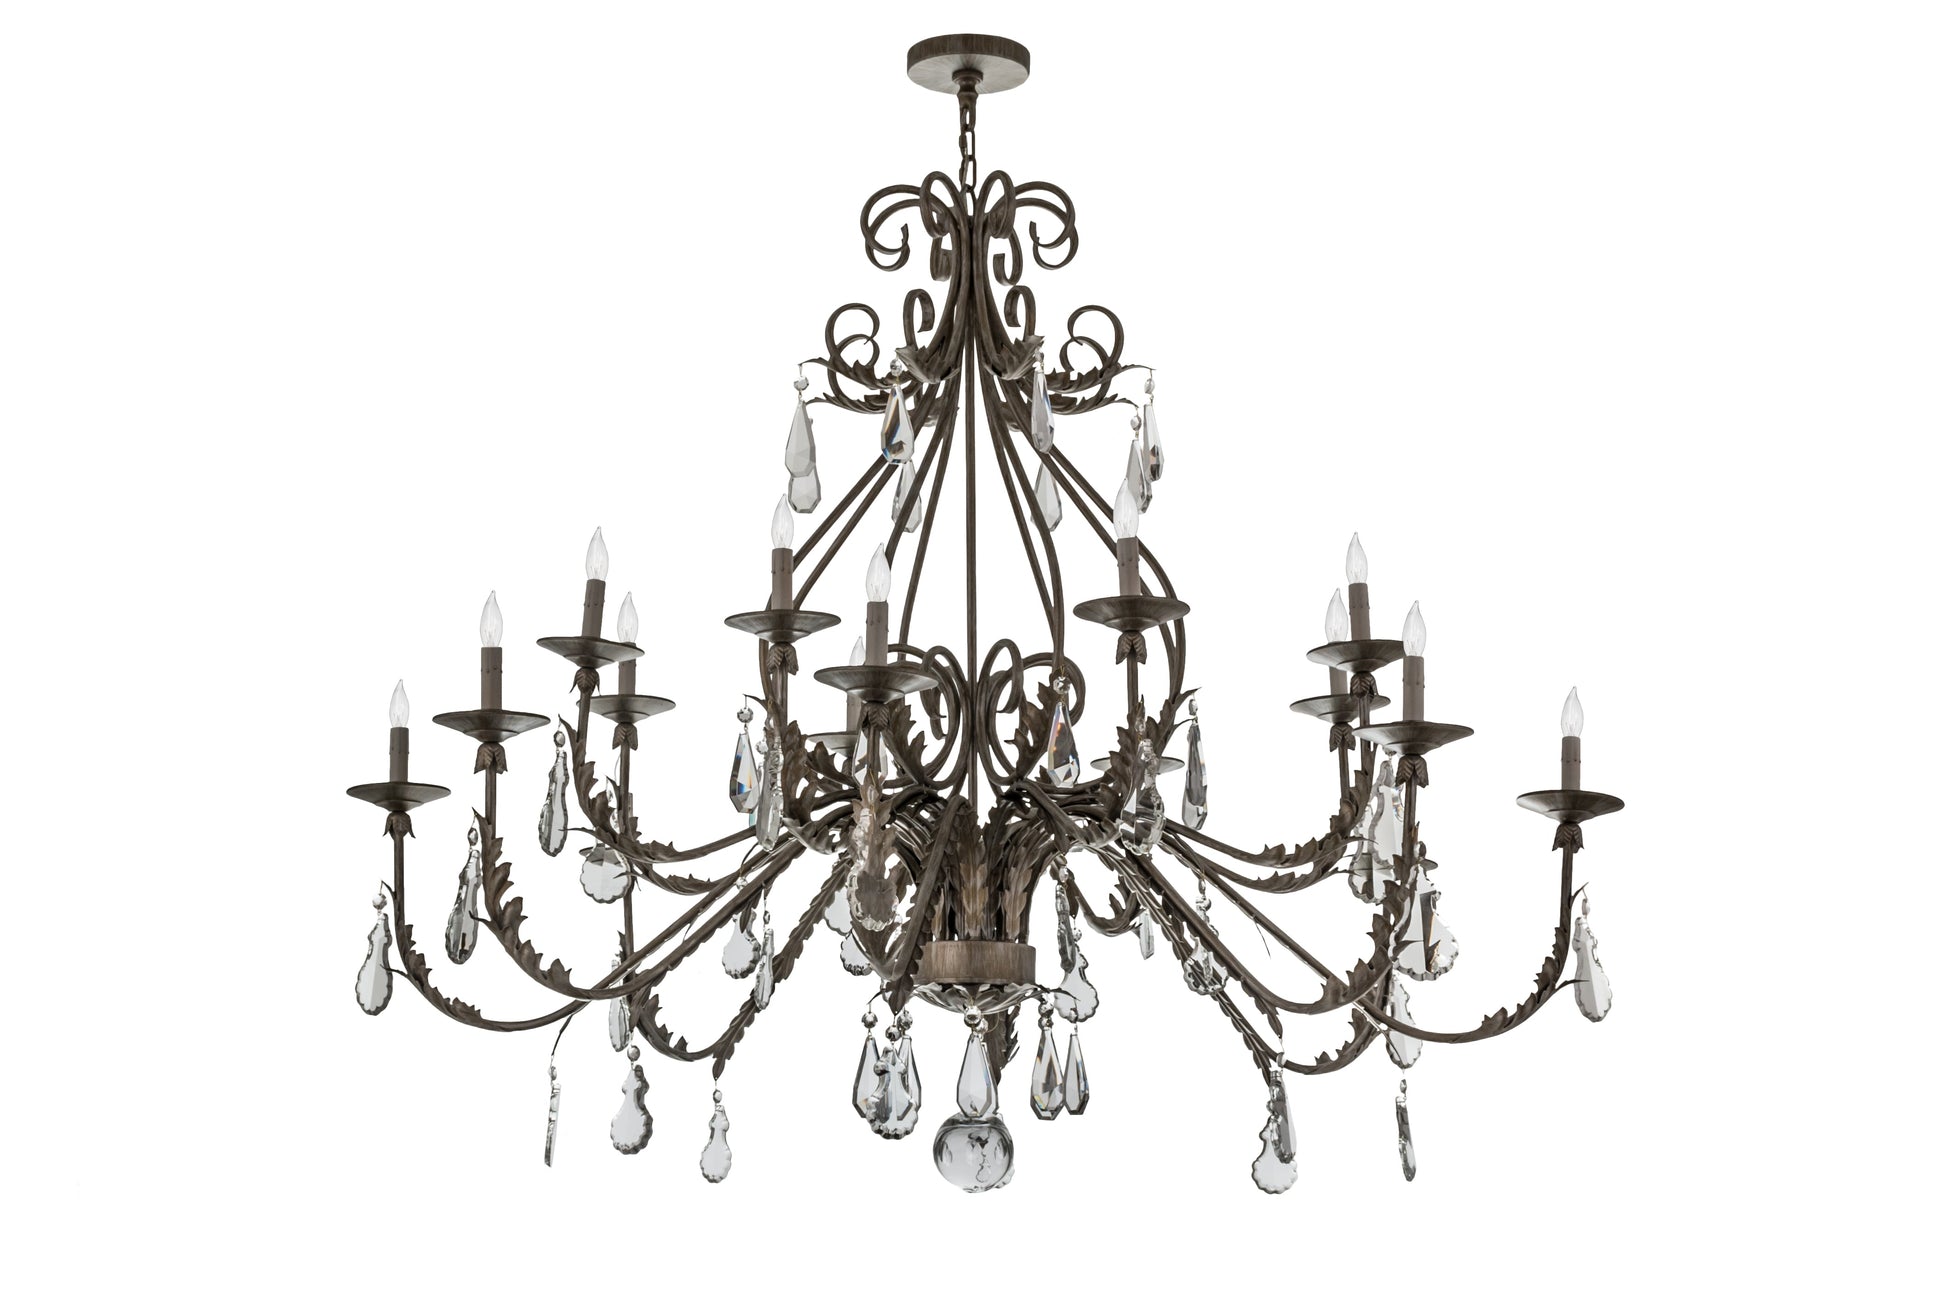 60" French Elegance 16-Light Chandelier by 2nd Ave Lighting